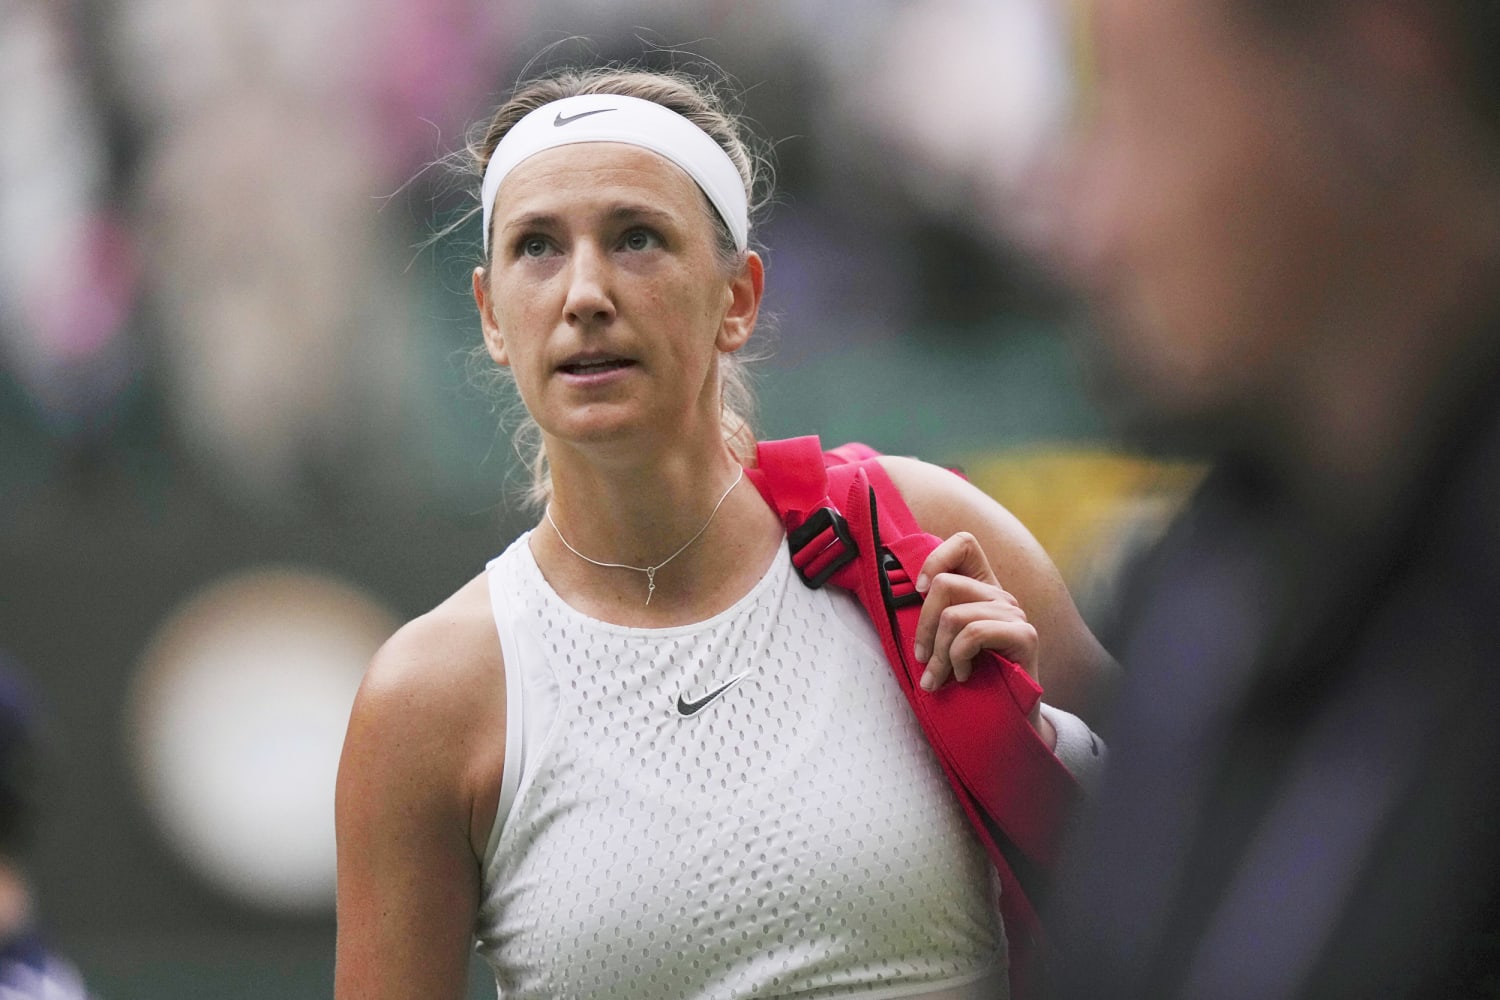 Russian tennis player speaks out after sparking outrage with